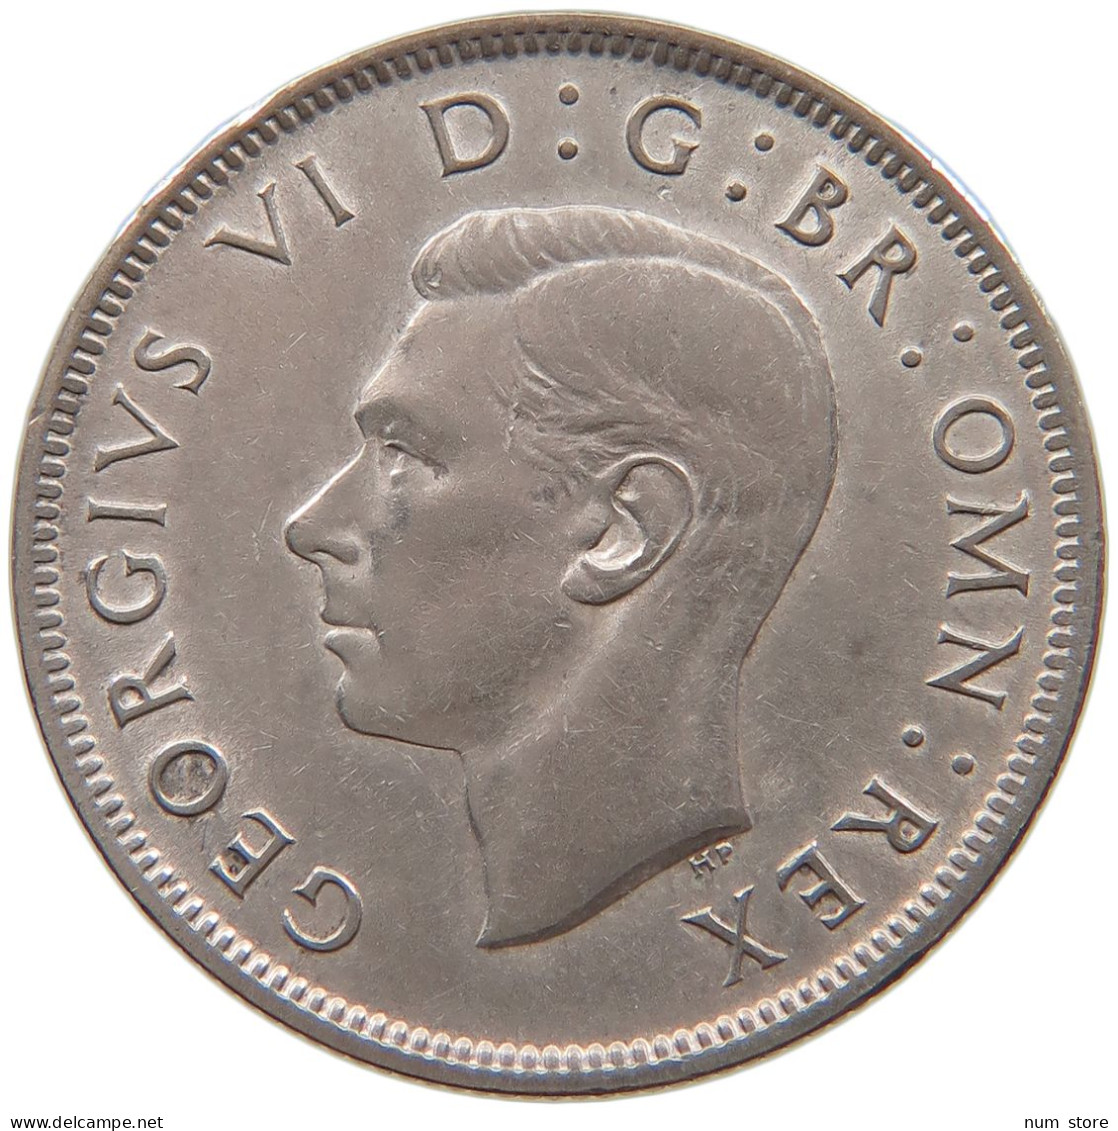 GREAT BRITAIN TWO SHILLINGS 1942 George VI. (1936-1952) #a073 0653 - J. 1 Florin / 2 Shillings